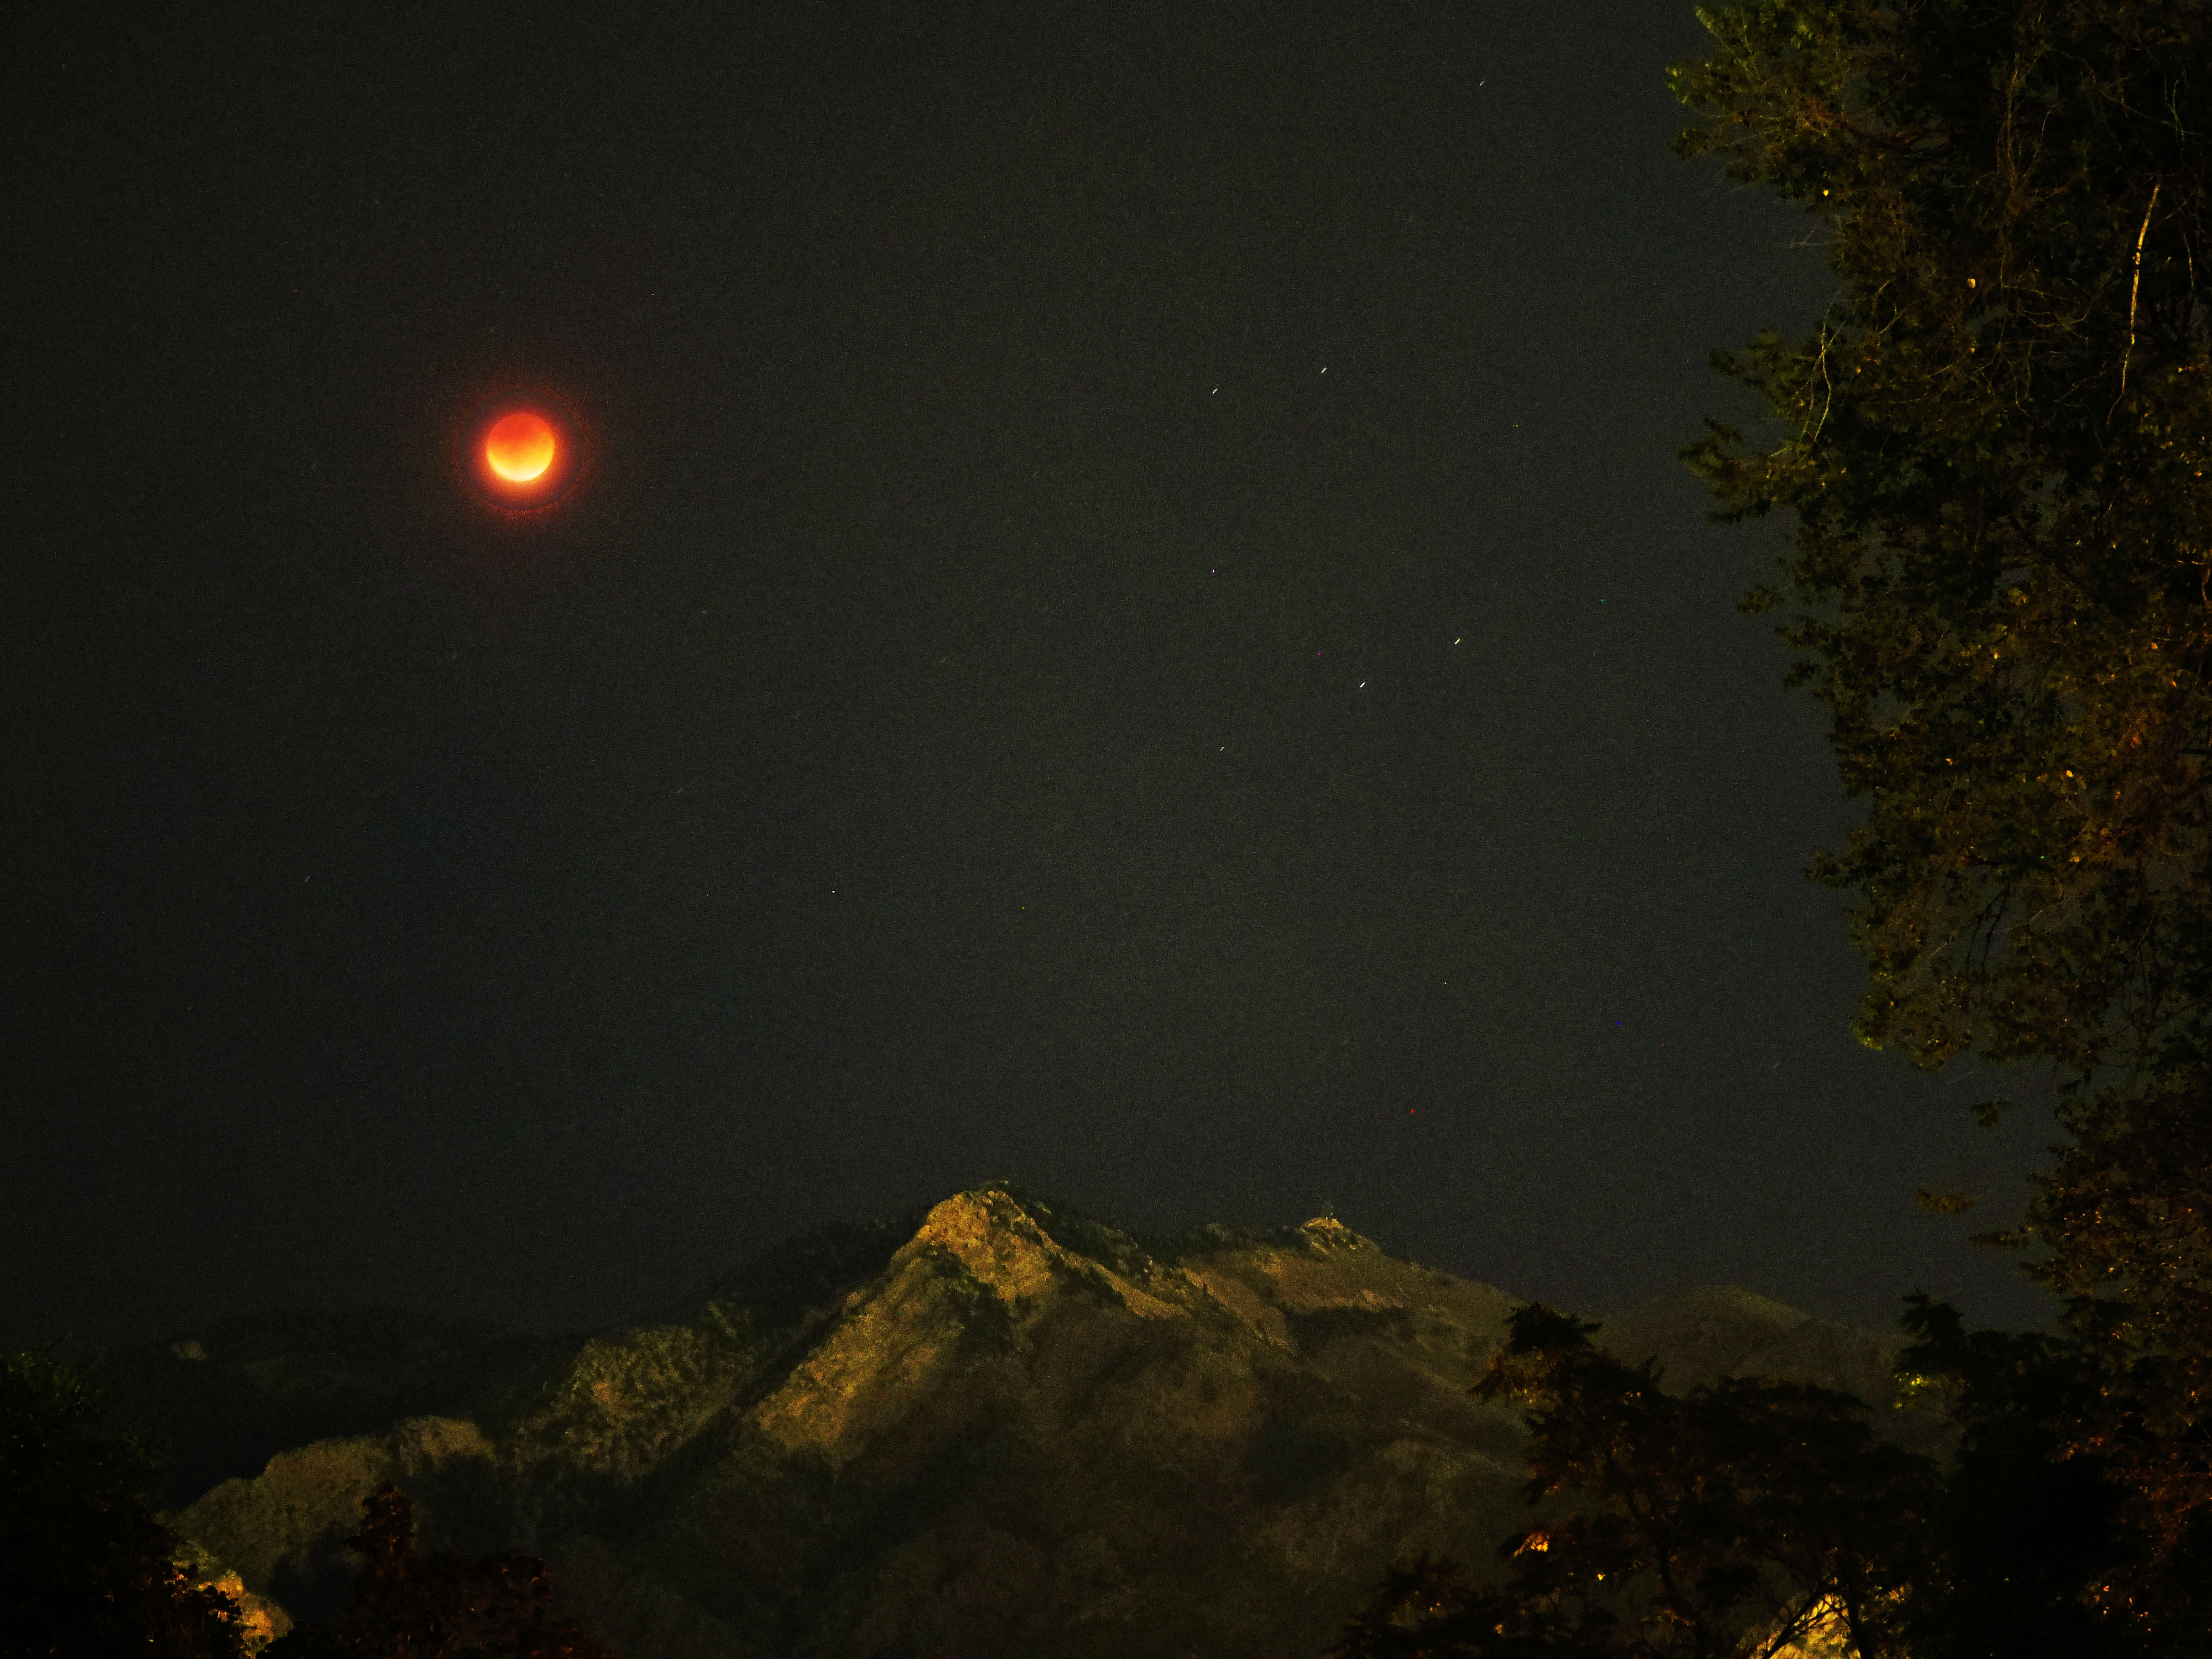 PHOTO OF THE DAY:  Super Blood Moon Over Ogden